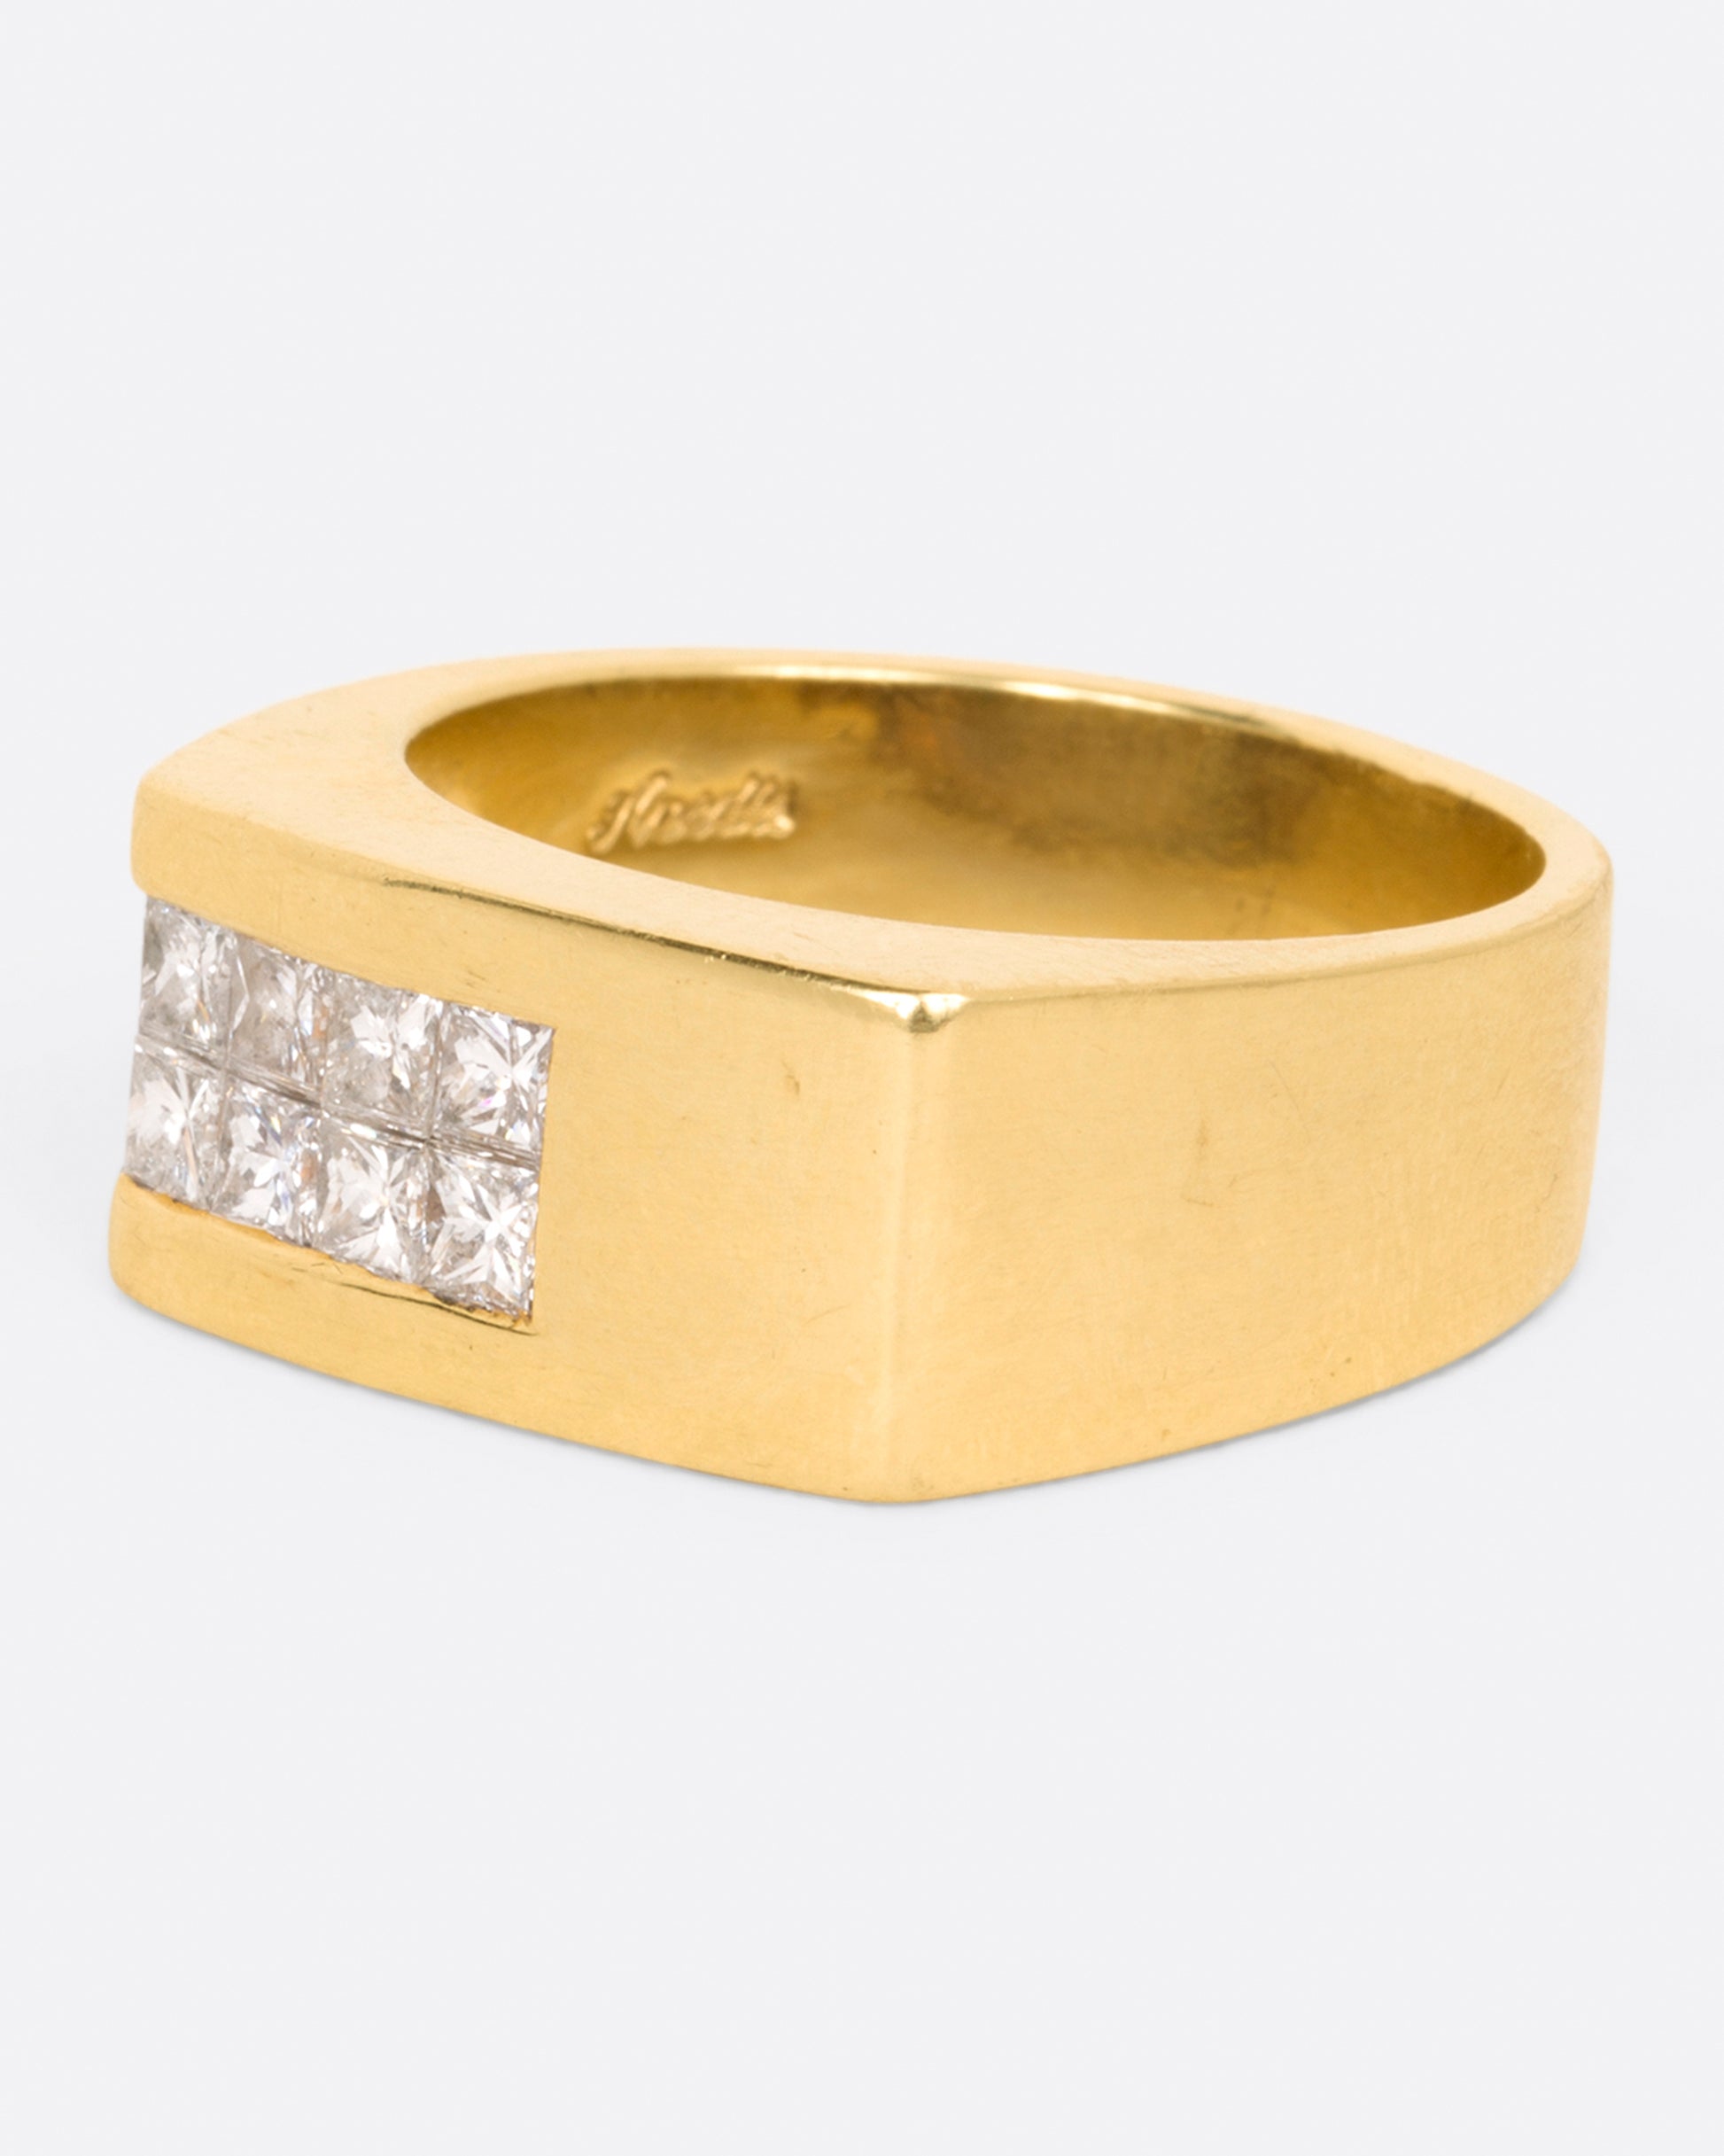 A yellow gold rectangular signet ring with 10 princess cut diamonds on one corner, shown from the side.